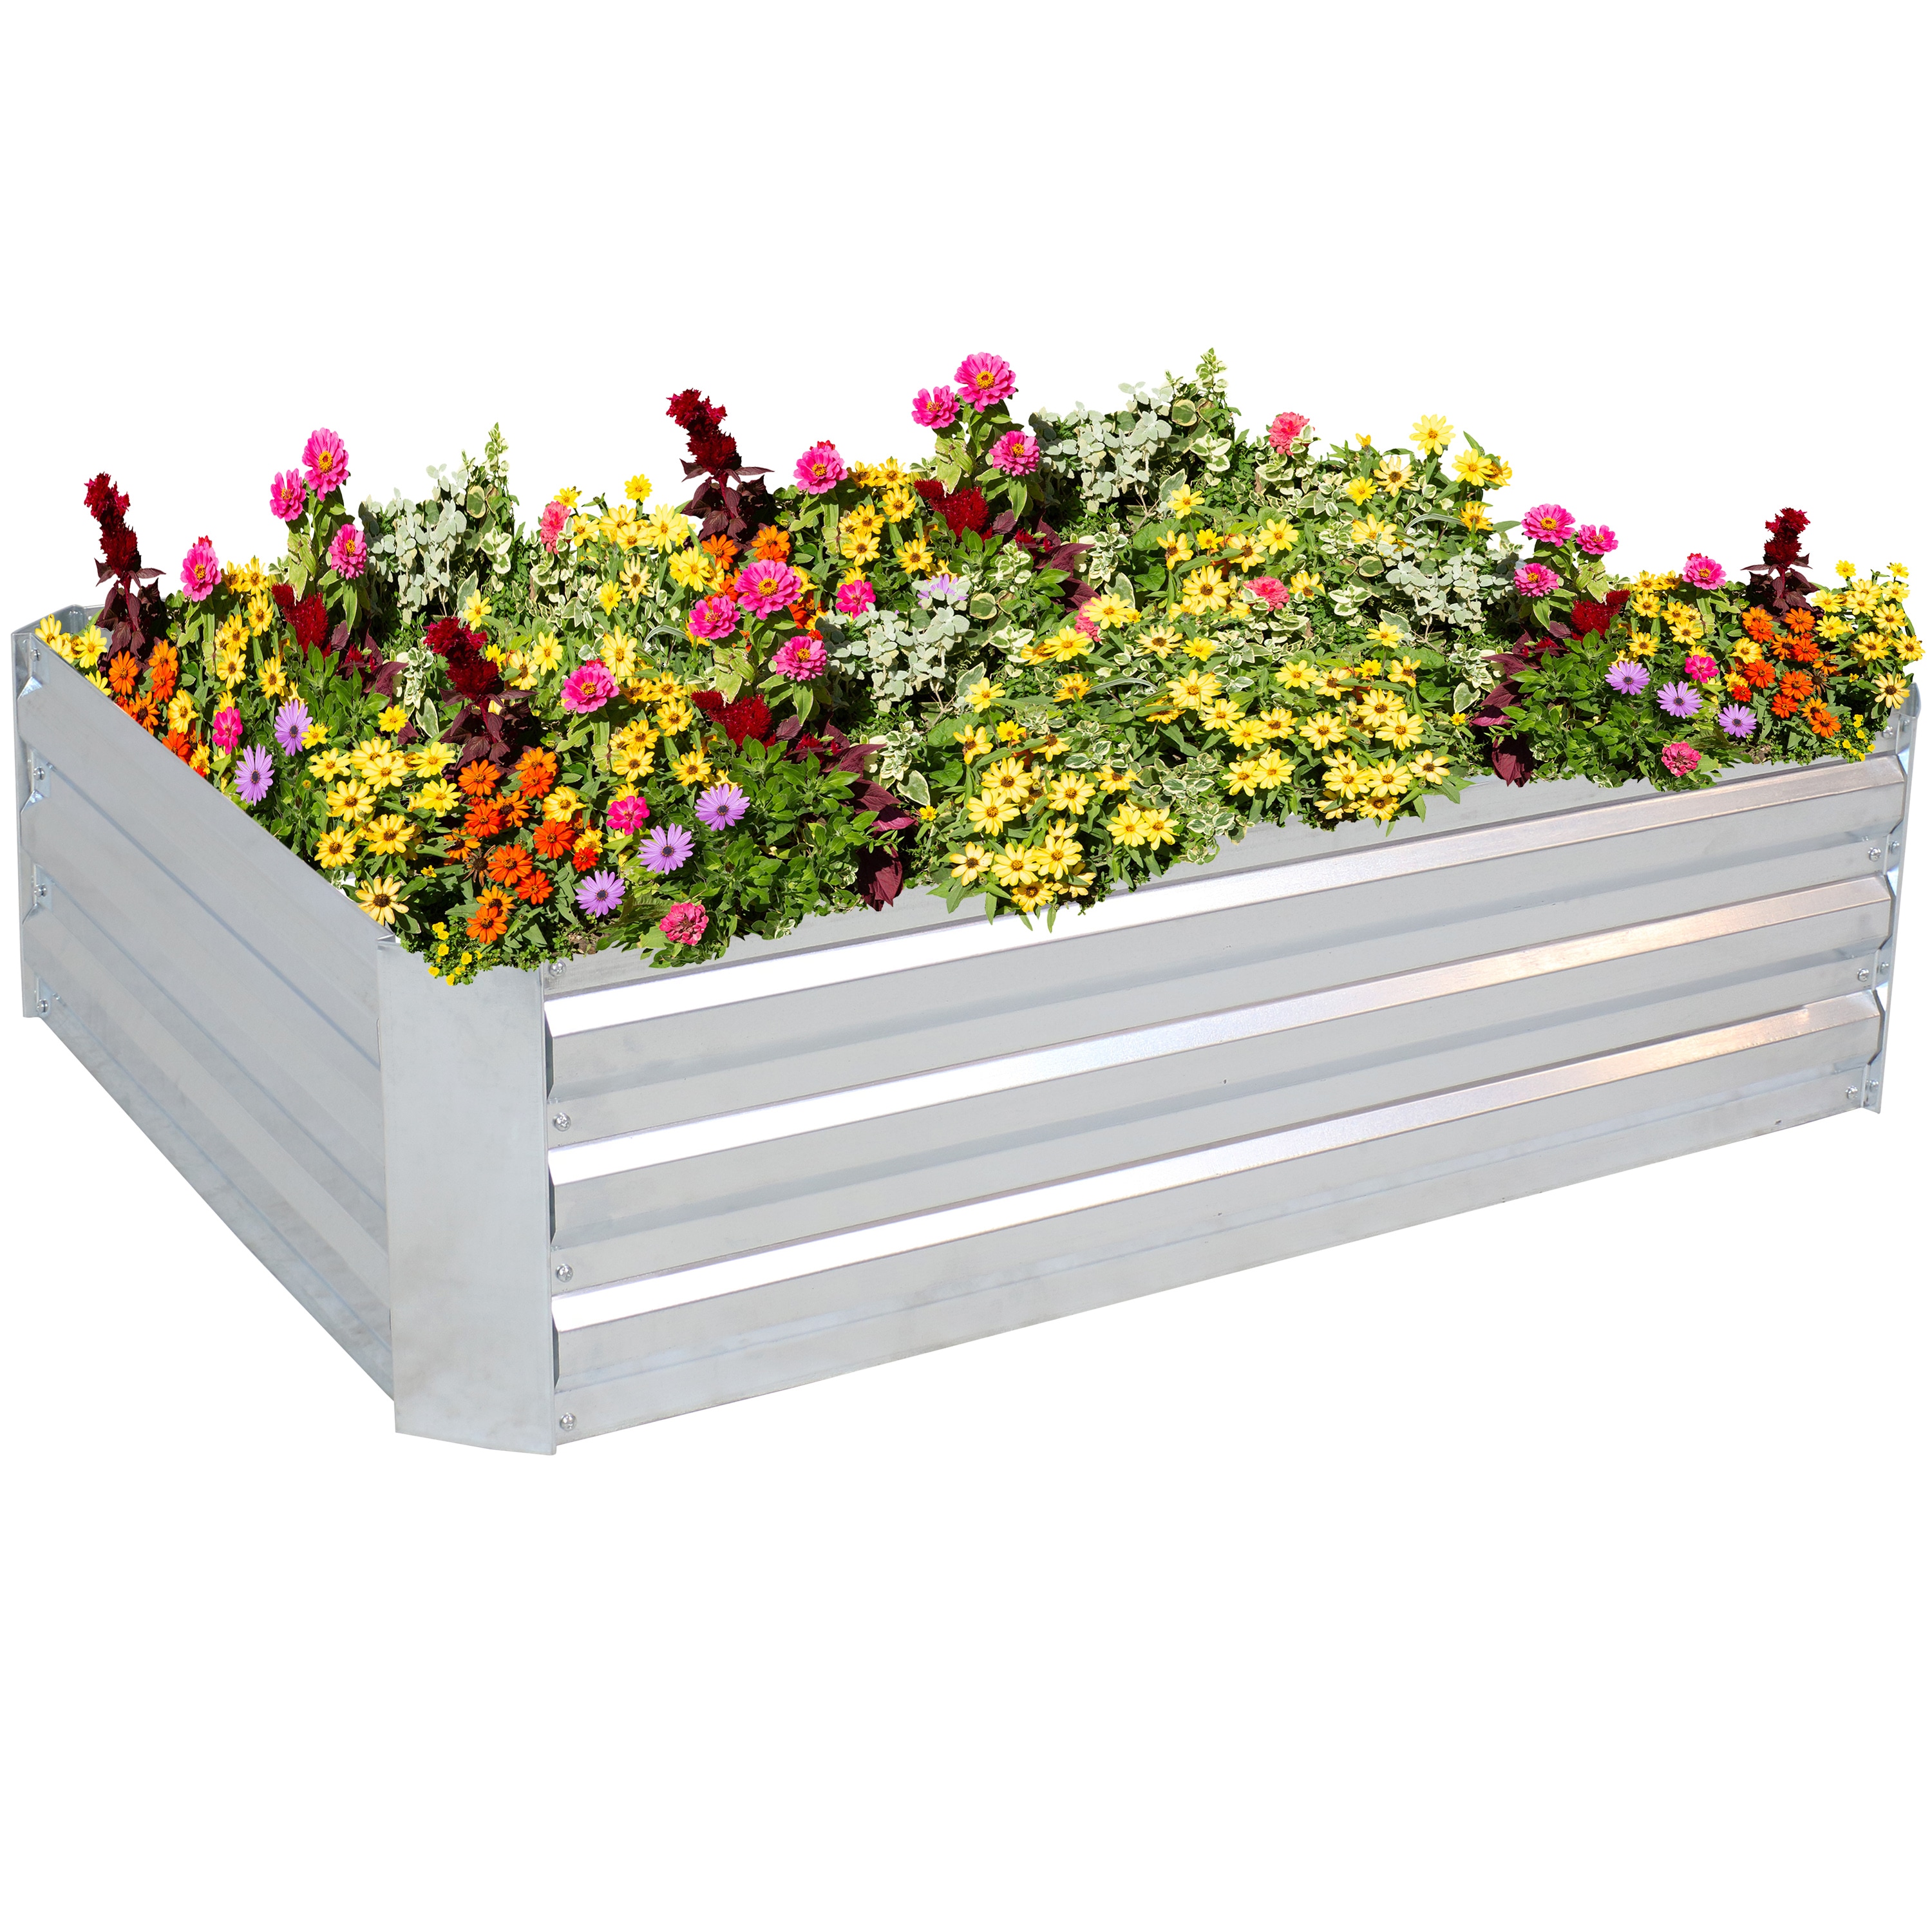 40 Inch Long Raised Garden Beds at Lowes.com